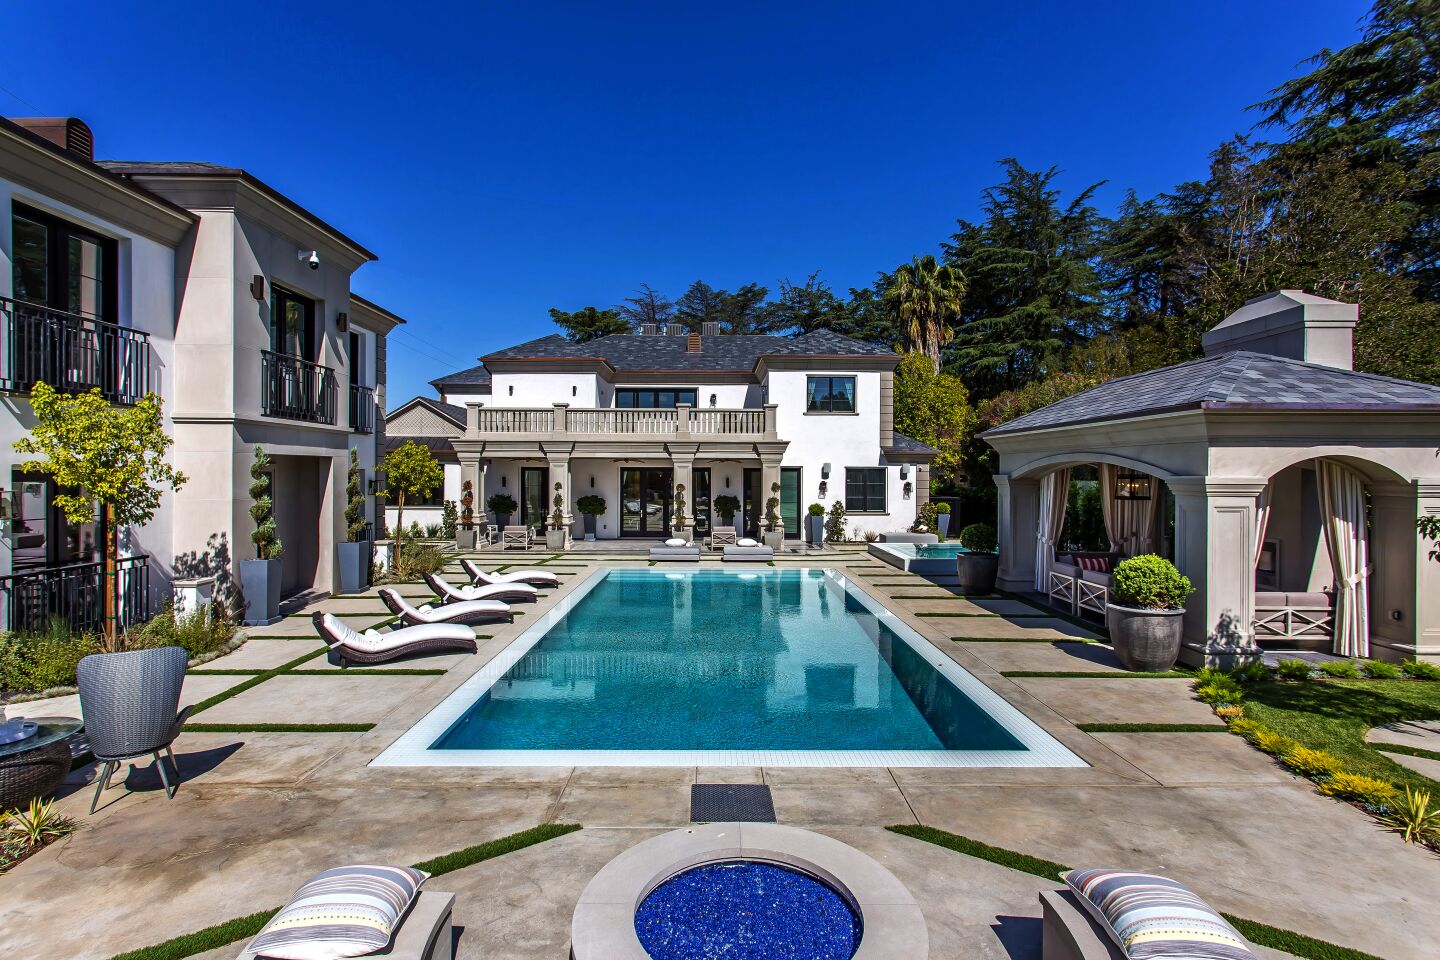 Grammy-winning producer Philip Lawrence shelled out $10.55 million for the Encino home of former Dodger Jimmy Rollins. The neoclassical-inspired home sits behind gates on more than half an acre with a sports court, a resort-style swimming pool and a guesthouse. A wine cellar, an indoor sauna and a grand domed entry are among features of the 14,900-square-foot mansion, which was built in 2017.